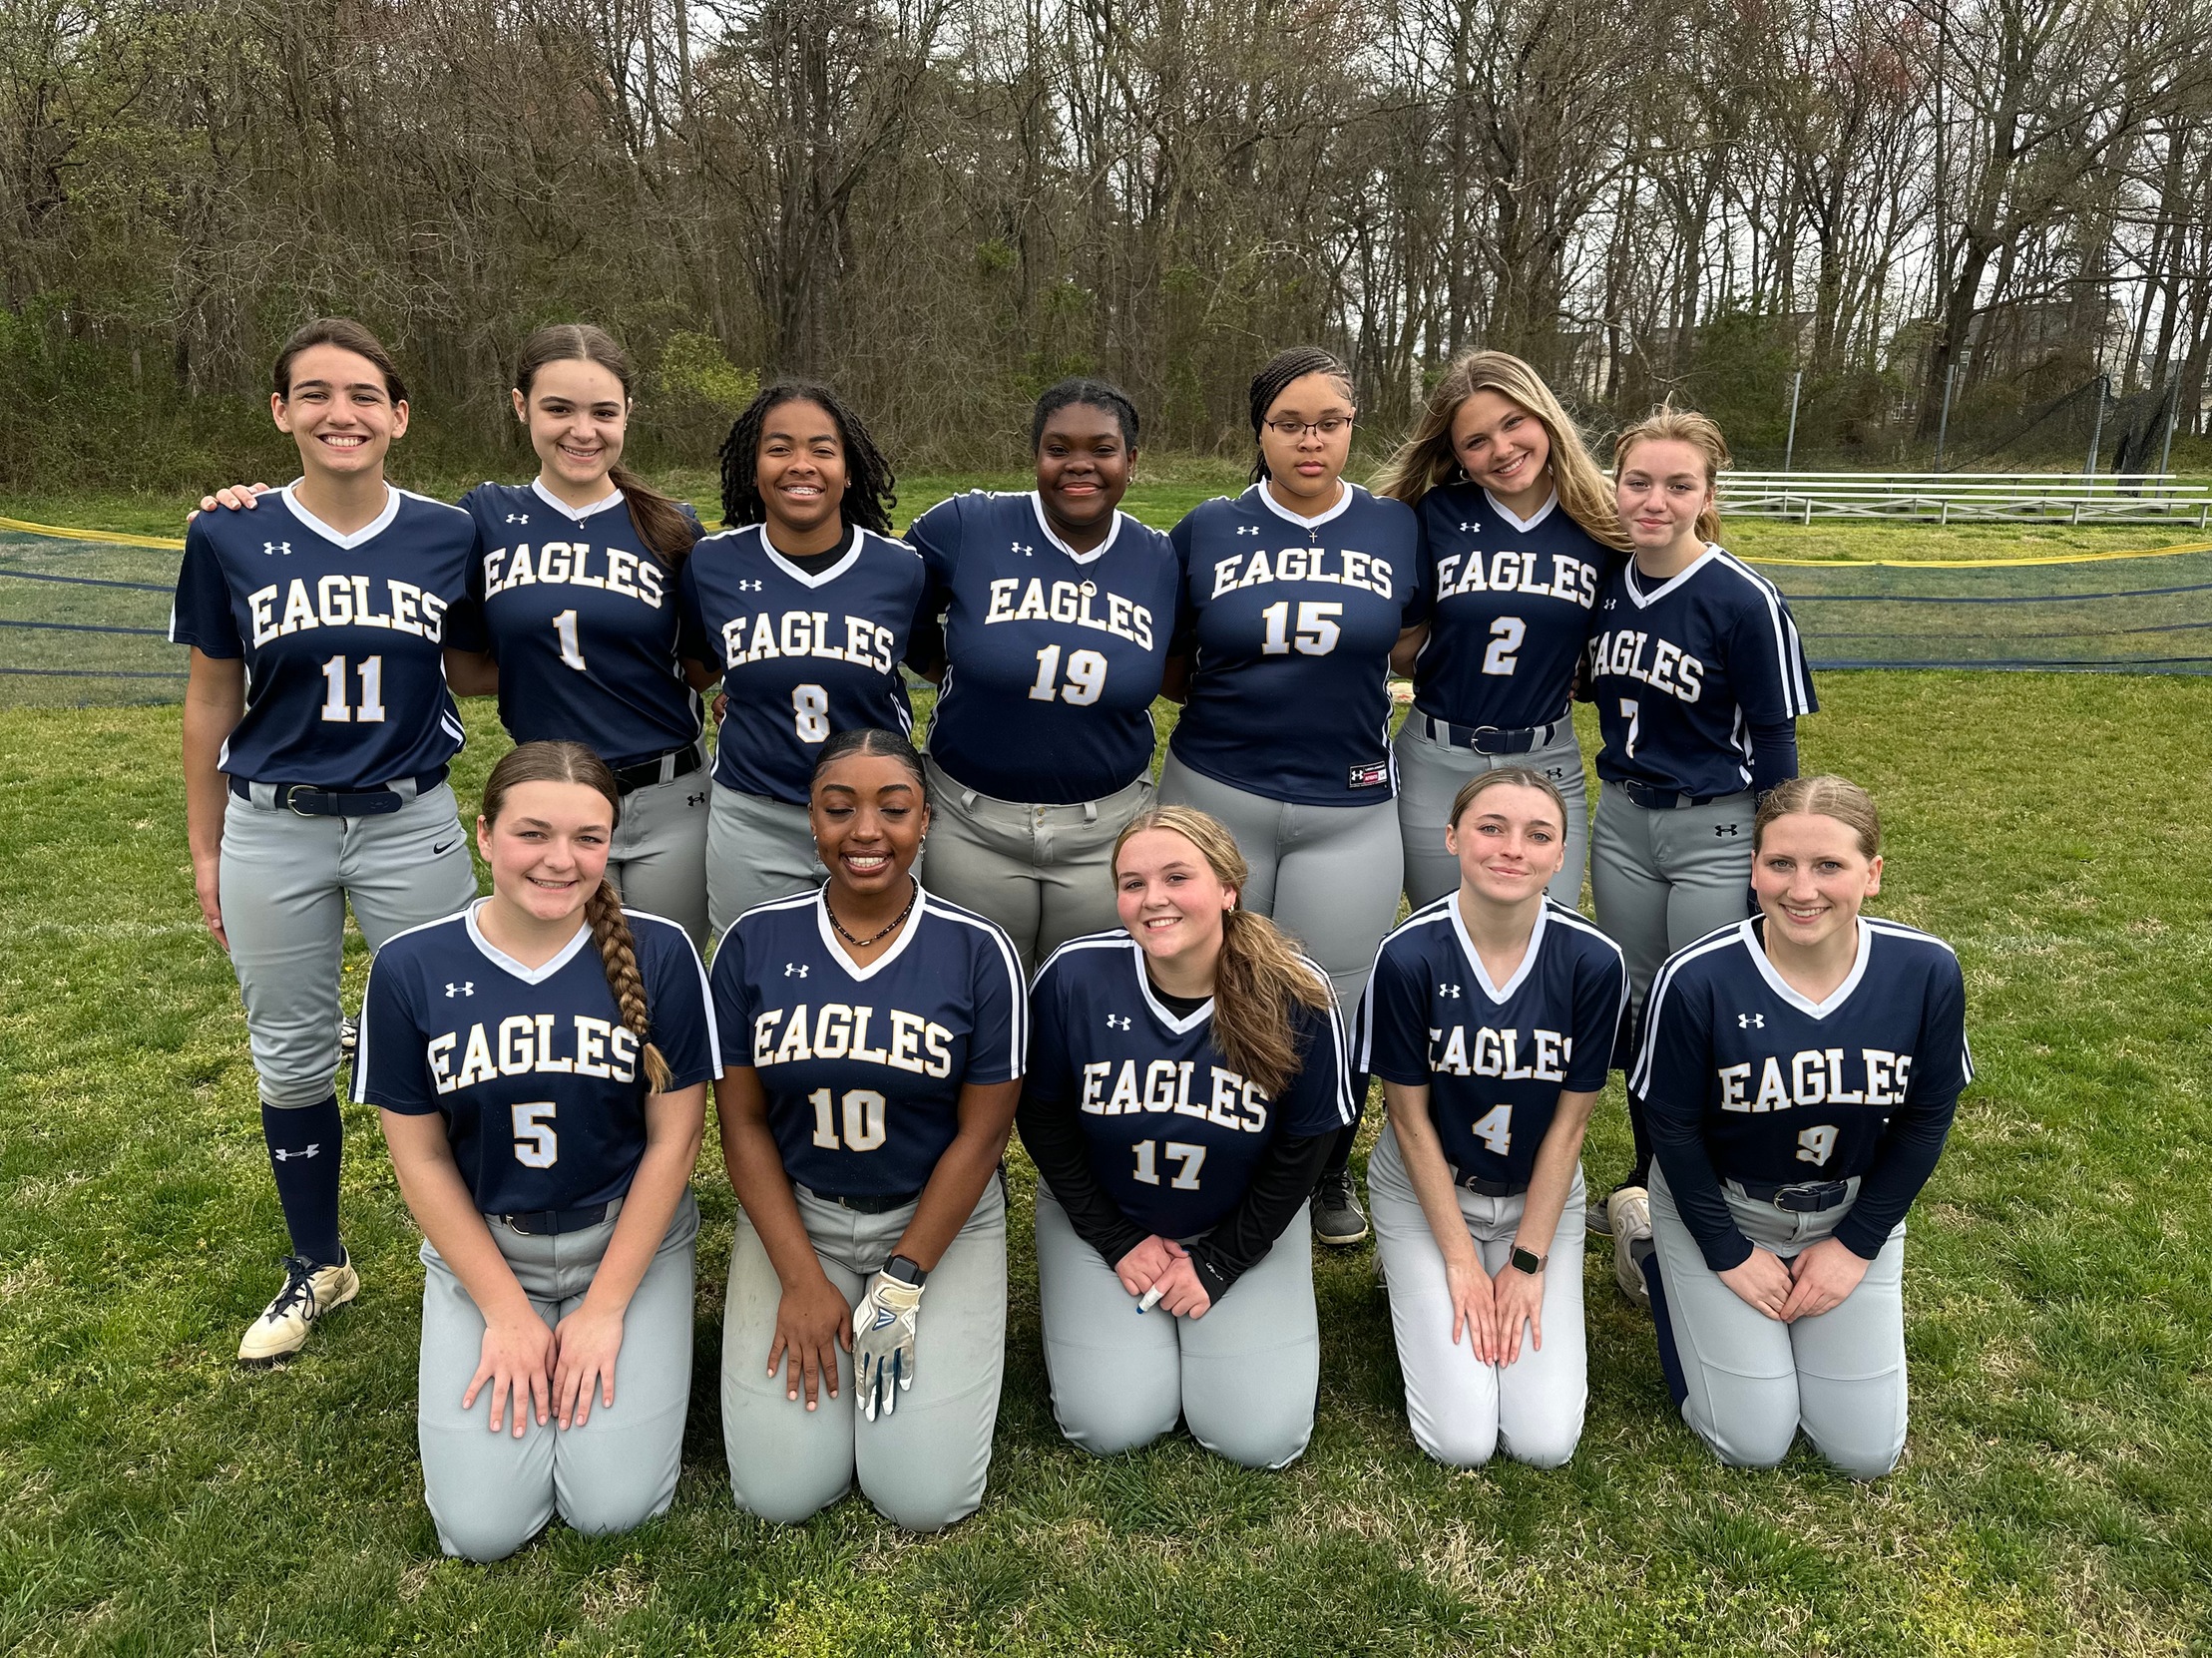 AACS Softball is Swinging for the Fences in a Quest to Bag a “C” Championship Title